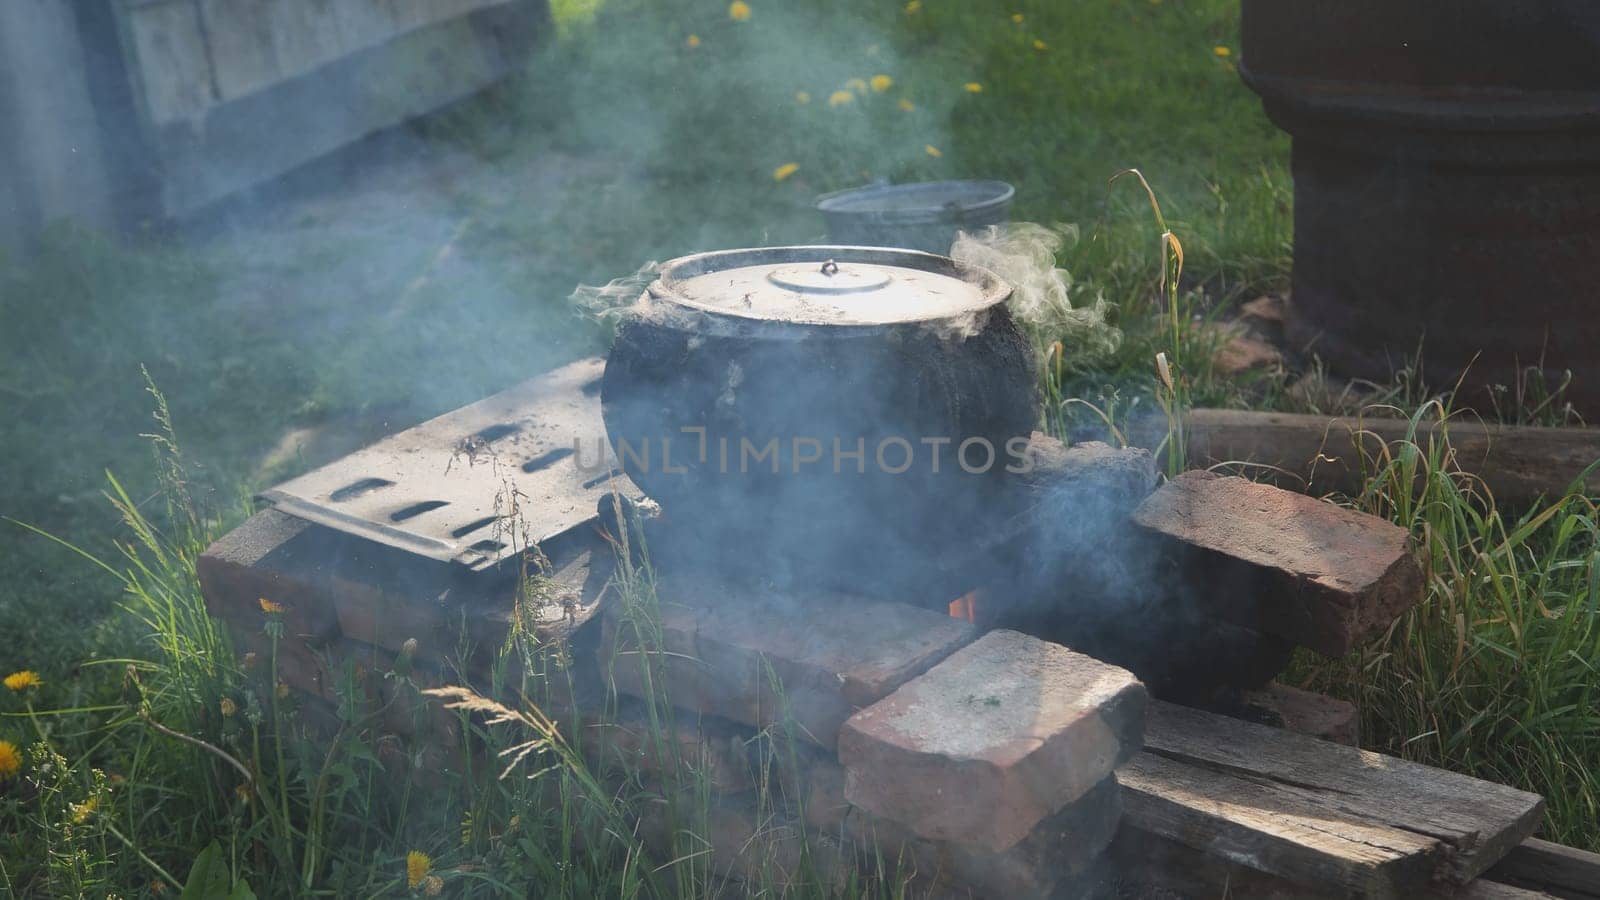 The cast iron in the village is used to cook food for the livestock